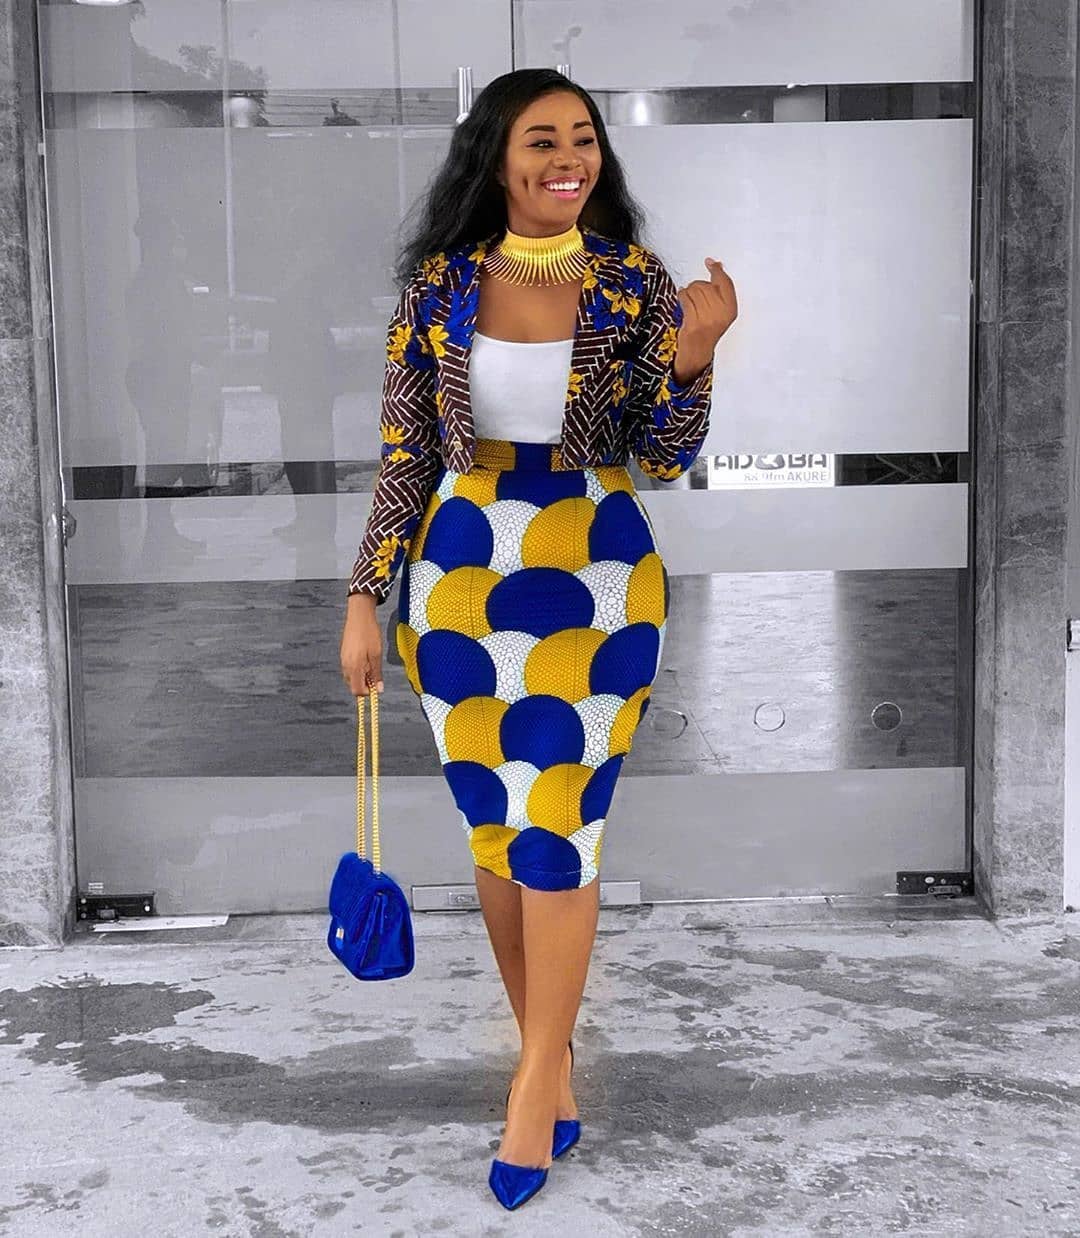 Mix and Match Ankara Styles: Get the Look of Your Dreams for a Steal!